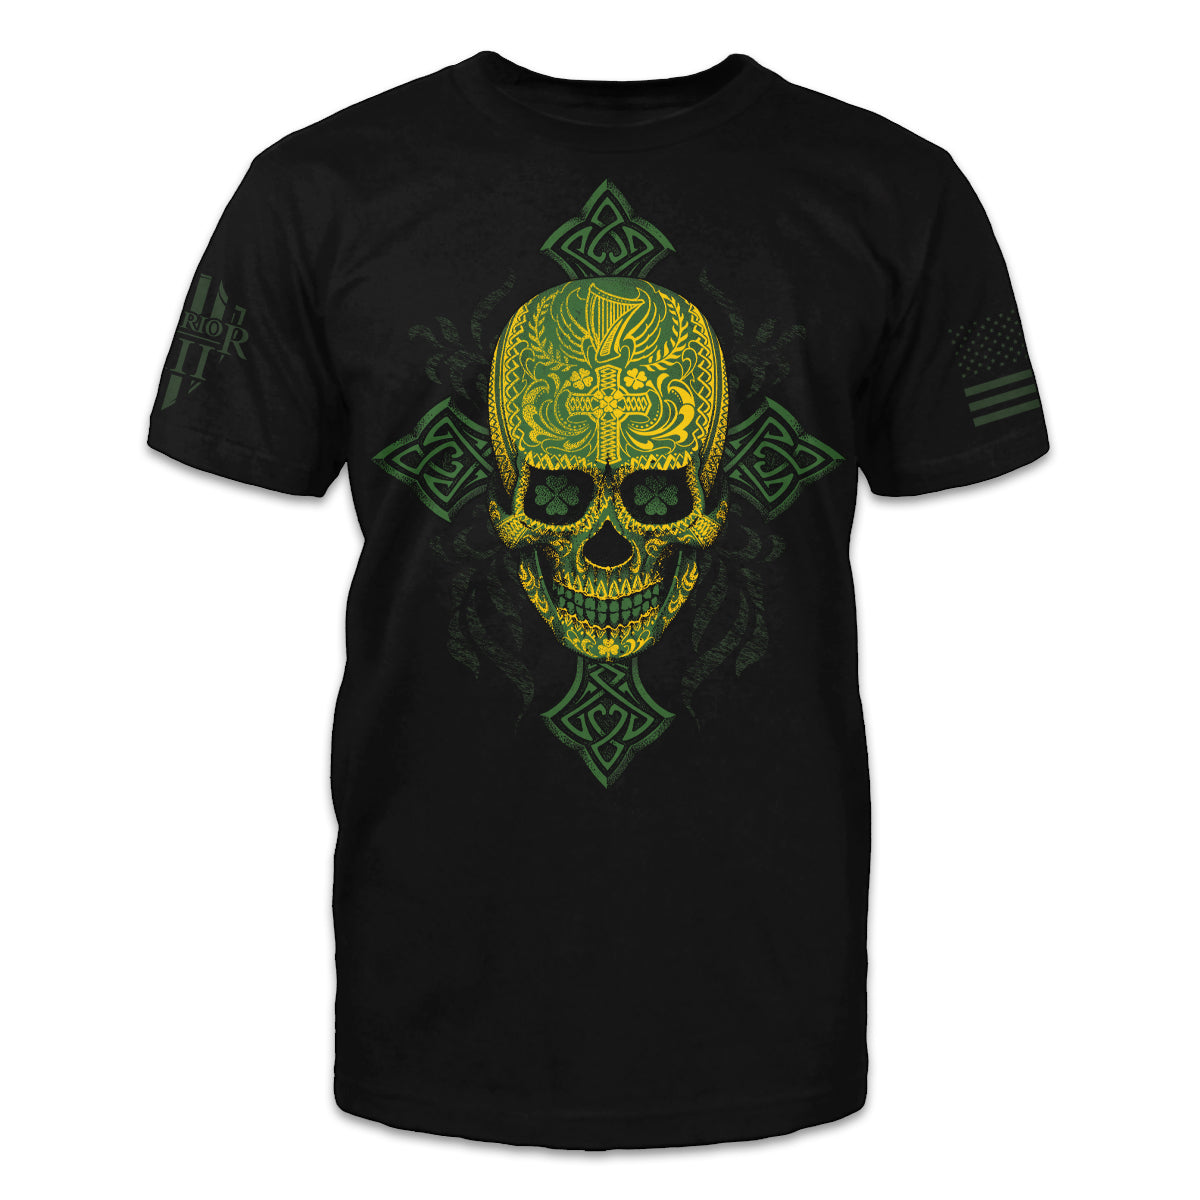 "Irish Sugar Skull" is printed on a Black t-shirt with the main design printed on the the front and the back of this t-shirt has no printing. This shirt features our brand logo on the right sleeve and the American Flag on the left sleeve.